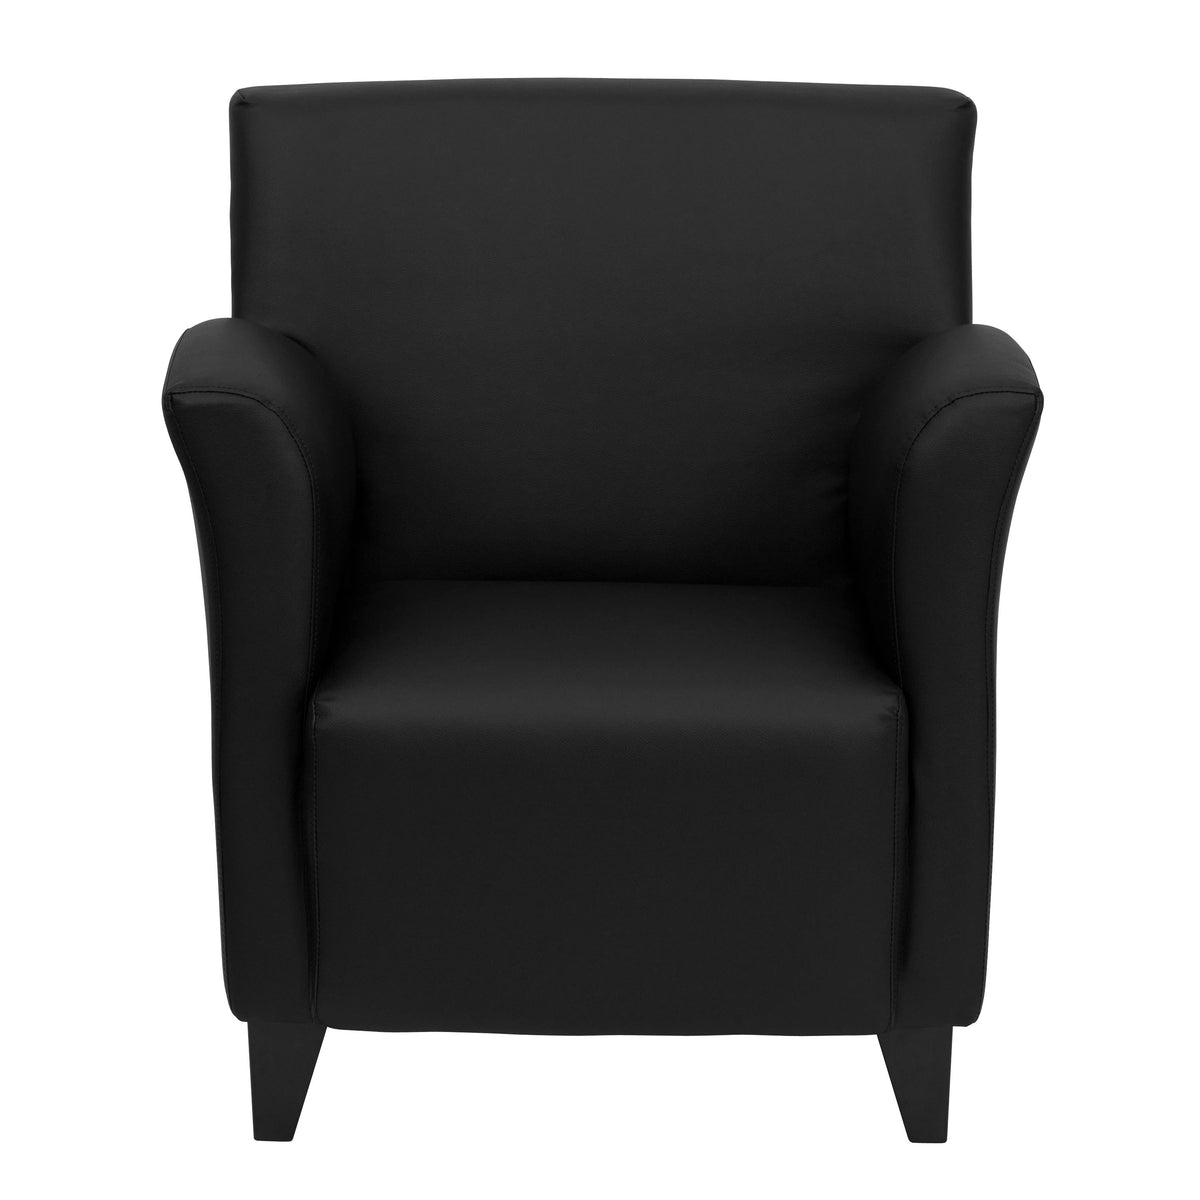 Black |#| Black LeatherSoft Lounge Chair with Flared Arms